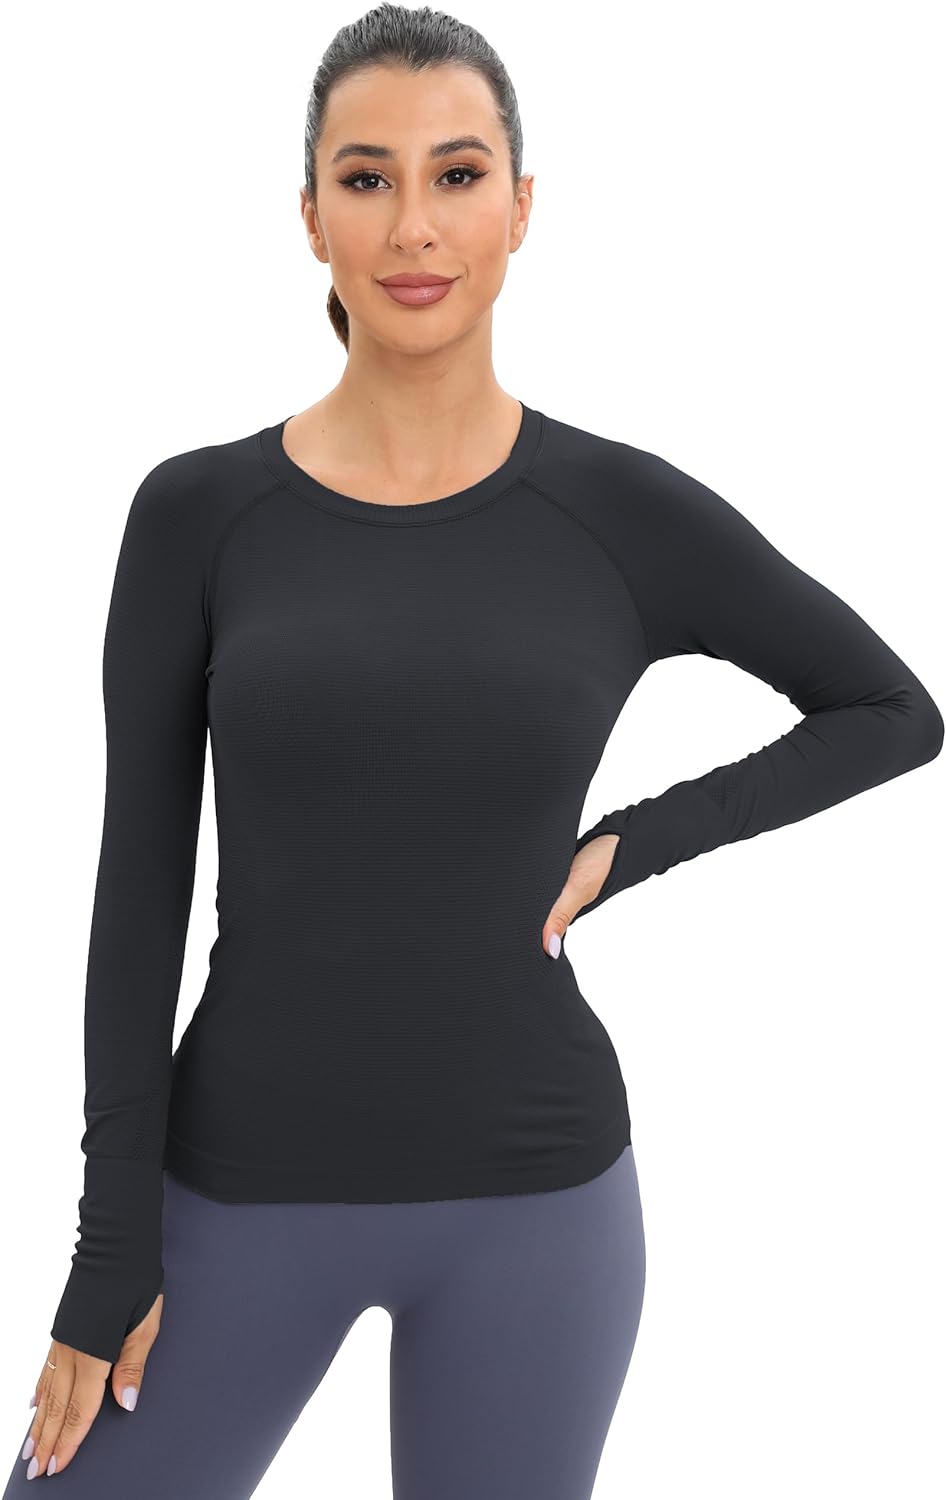 MathCat Workout Seamless Shirts for Women: A Review of the Long-Sleeved Yoga Running Breathable Thumb Holes Tops